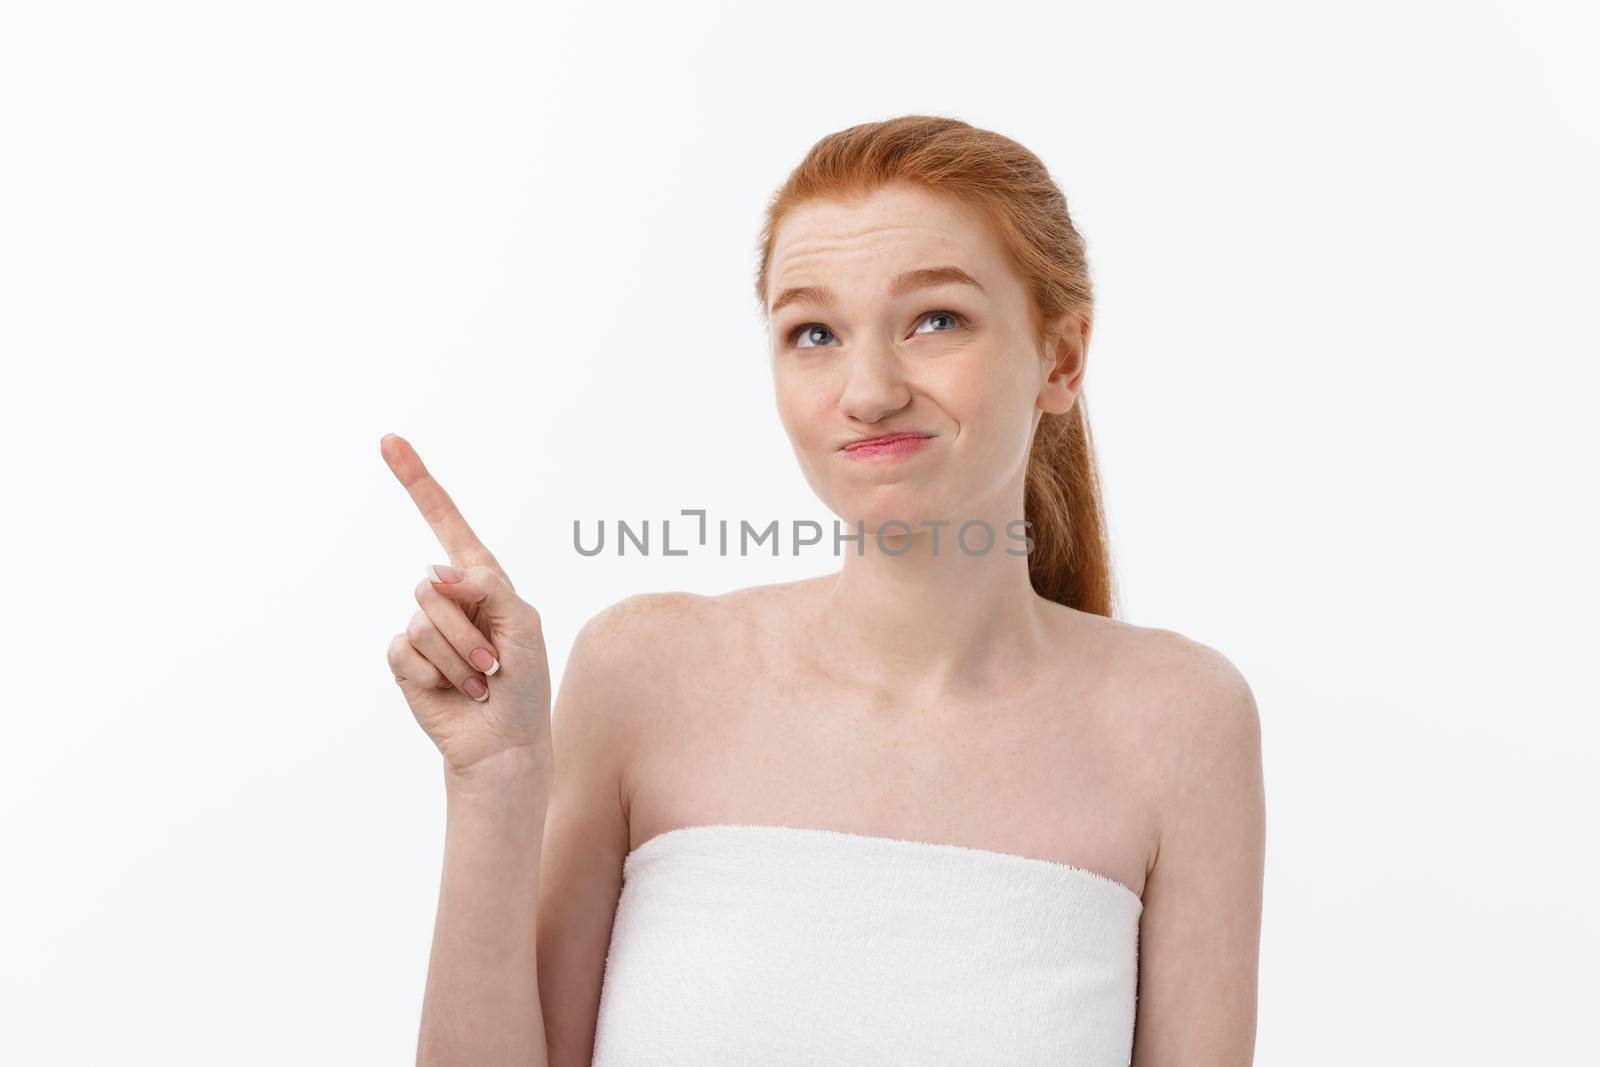 Portrait of caucasian cute in concern and shock, pointing index finger aside, over white background